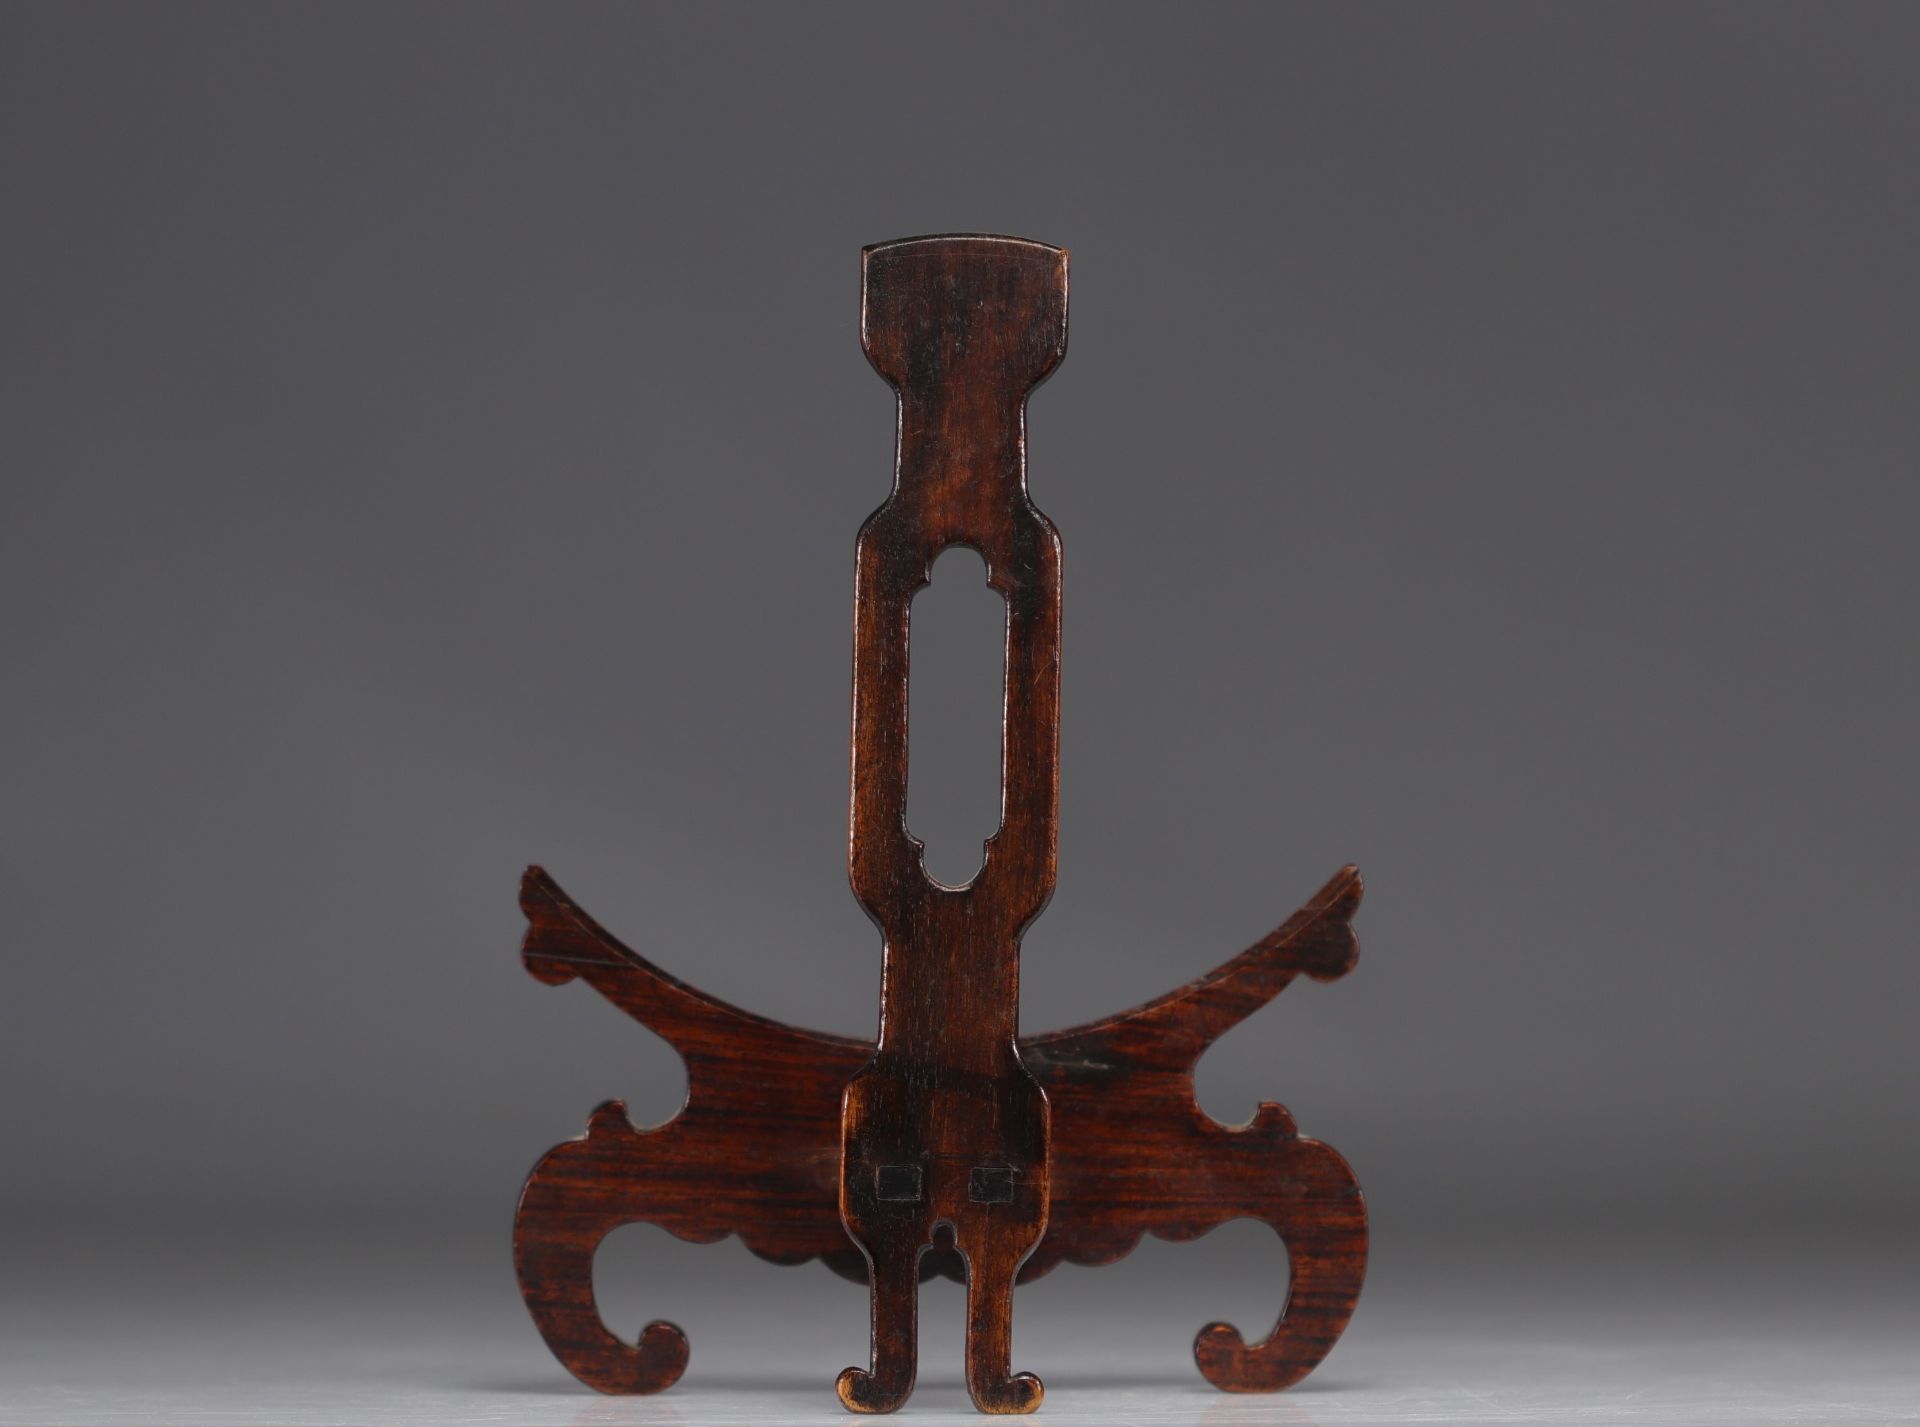 Plate holder in ironwood recognized as Chinese work from 19th century - Image 3 of 3